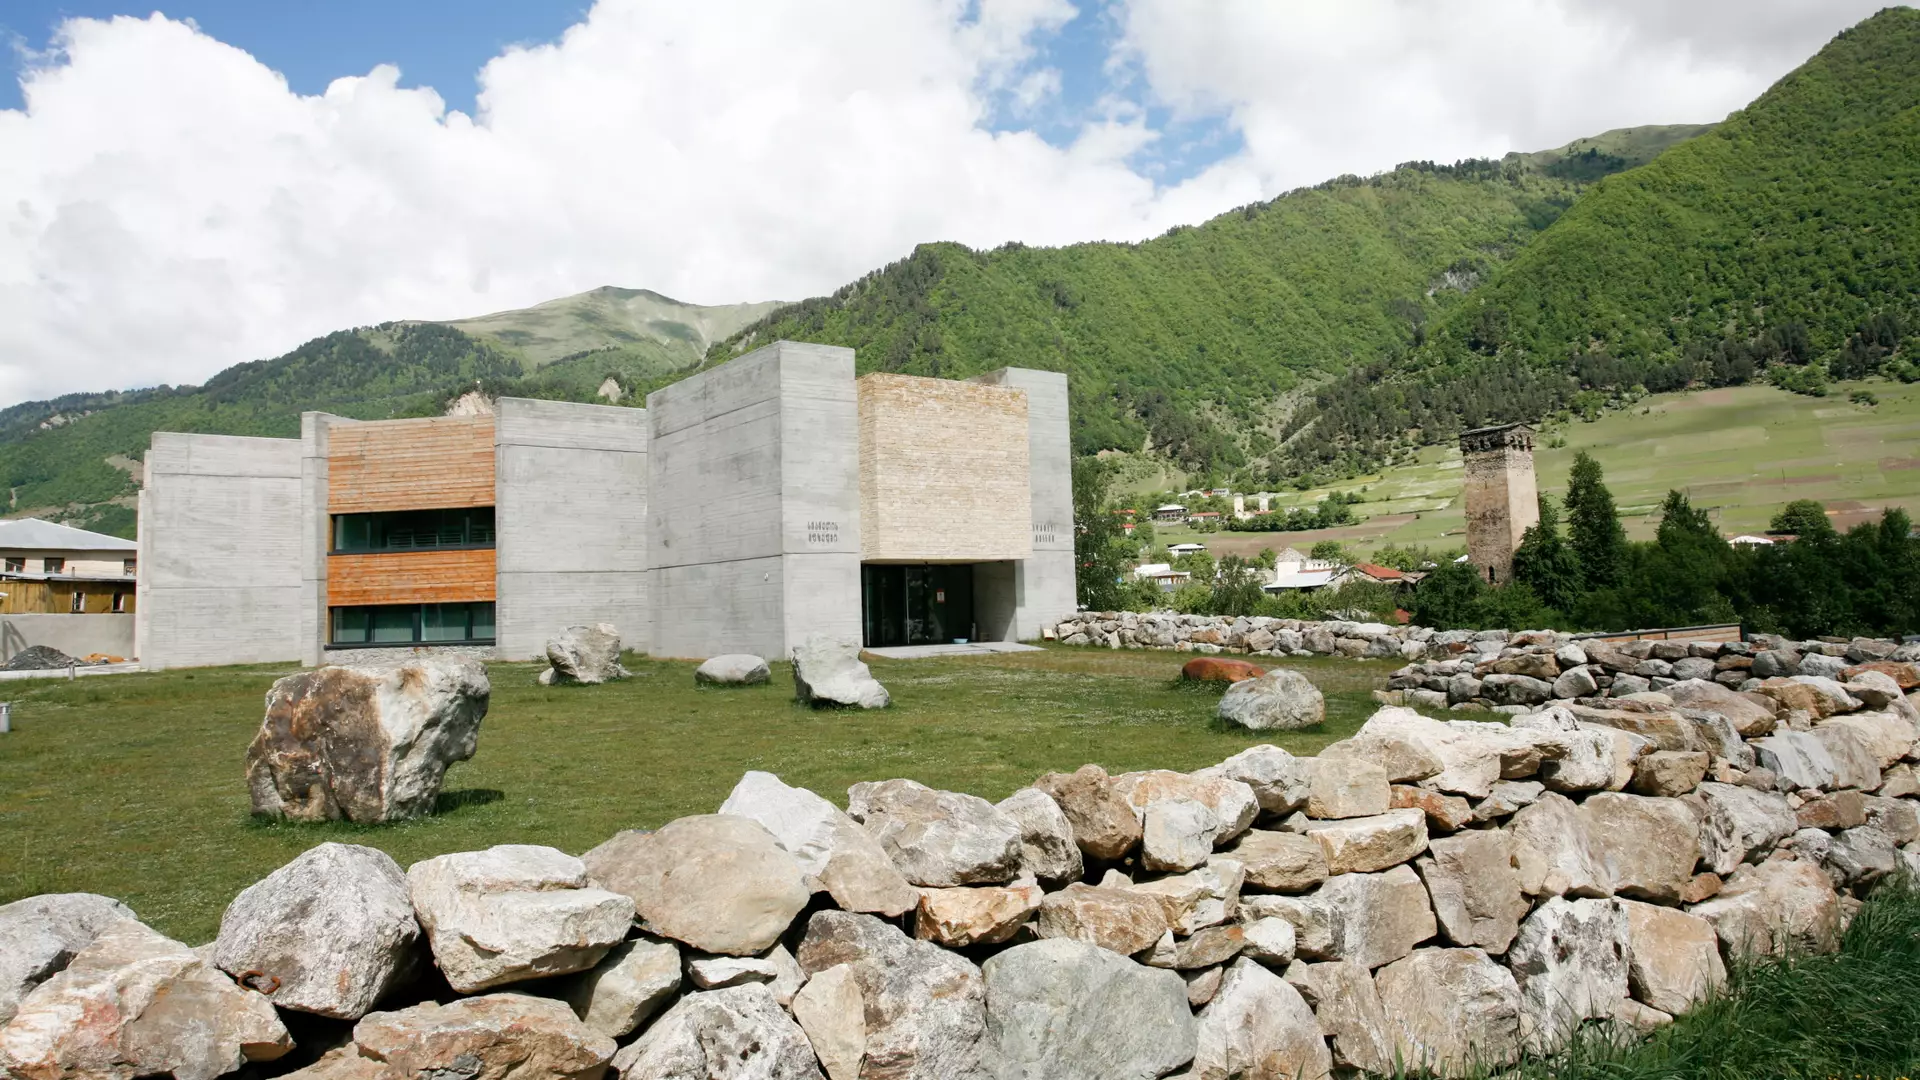 The Svaneti Museum Collection